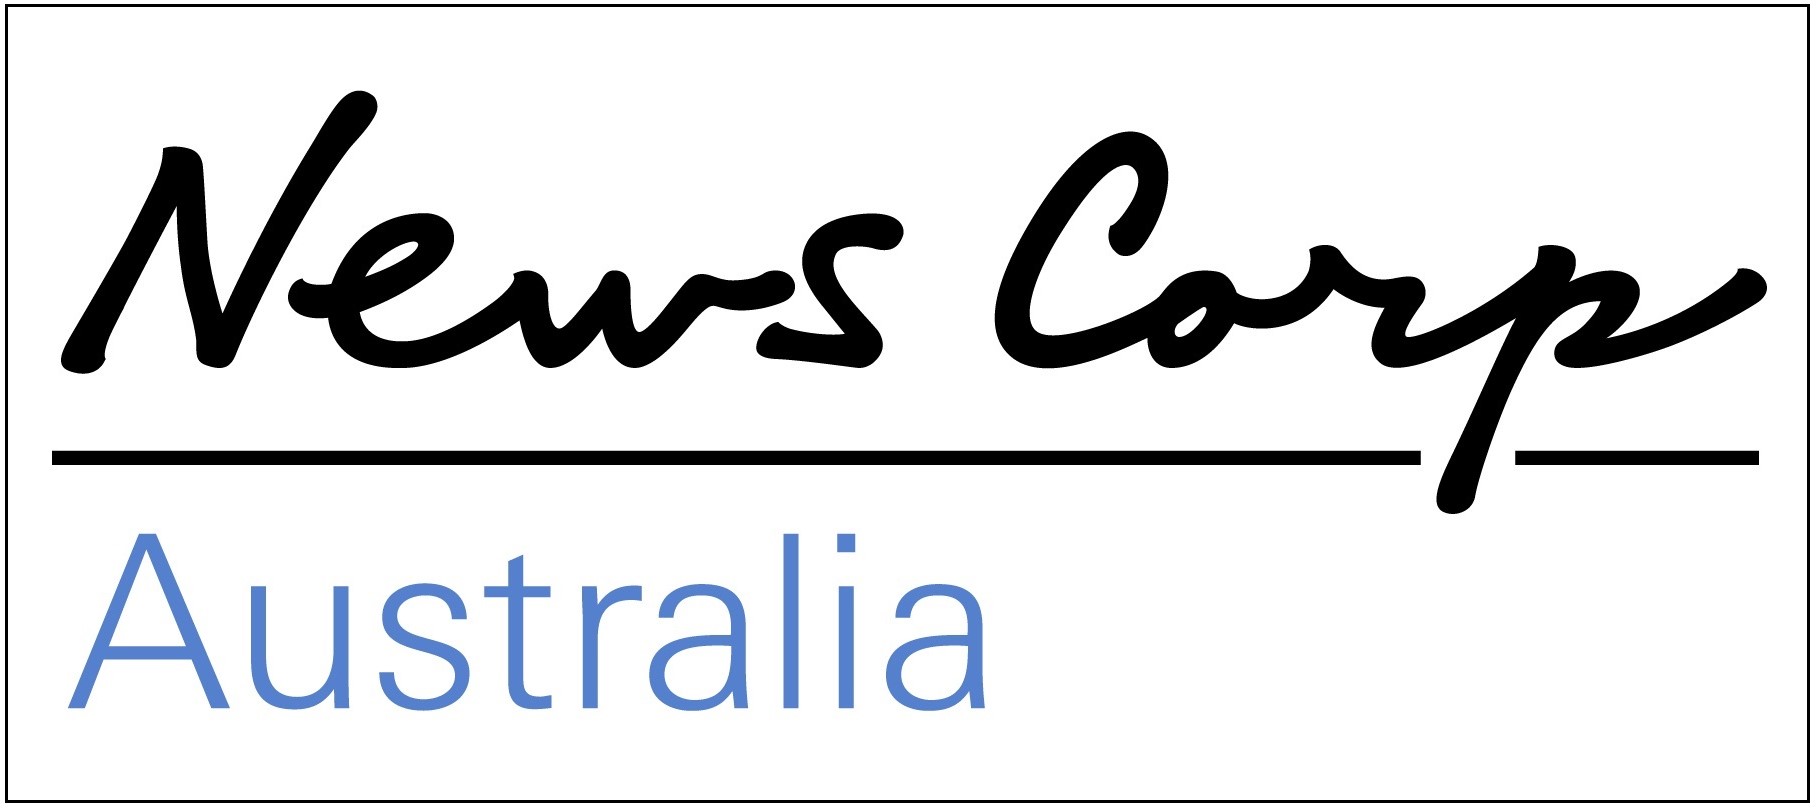 Ensure you “white list” the News Corp Australia email address in your email system